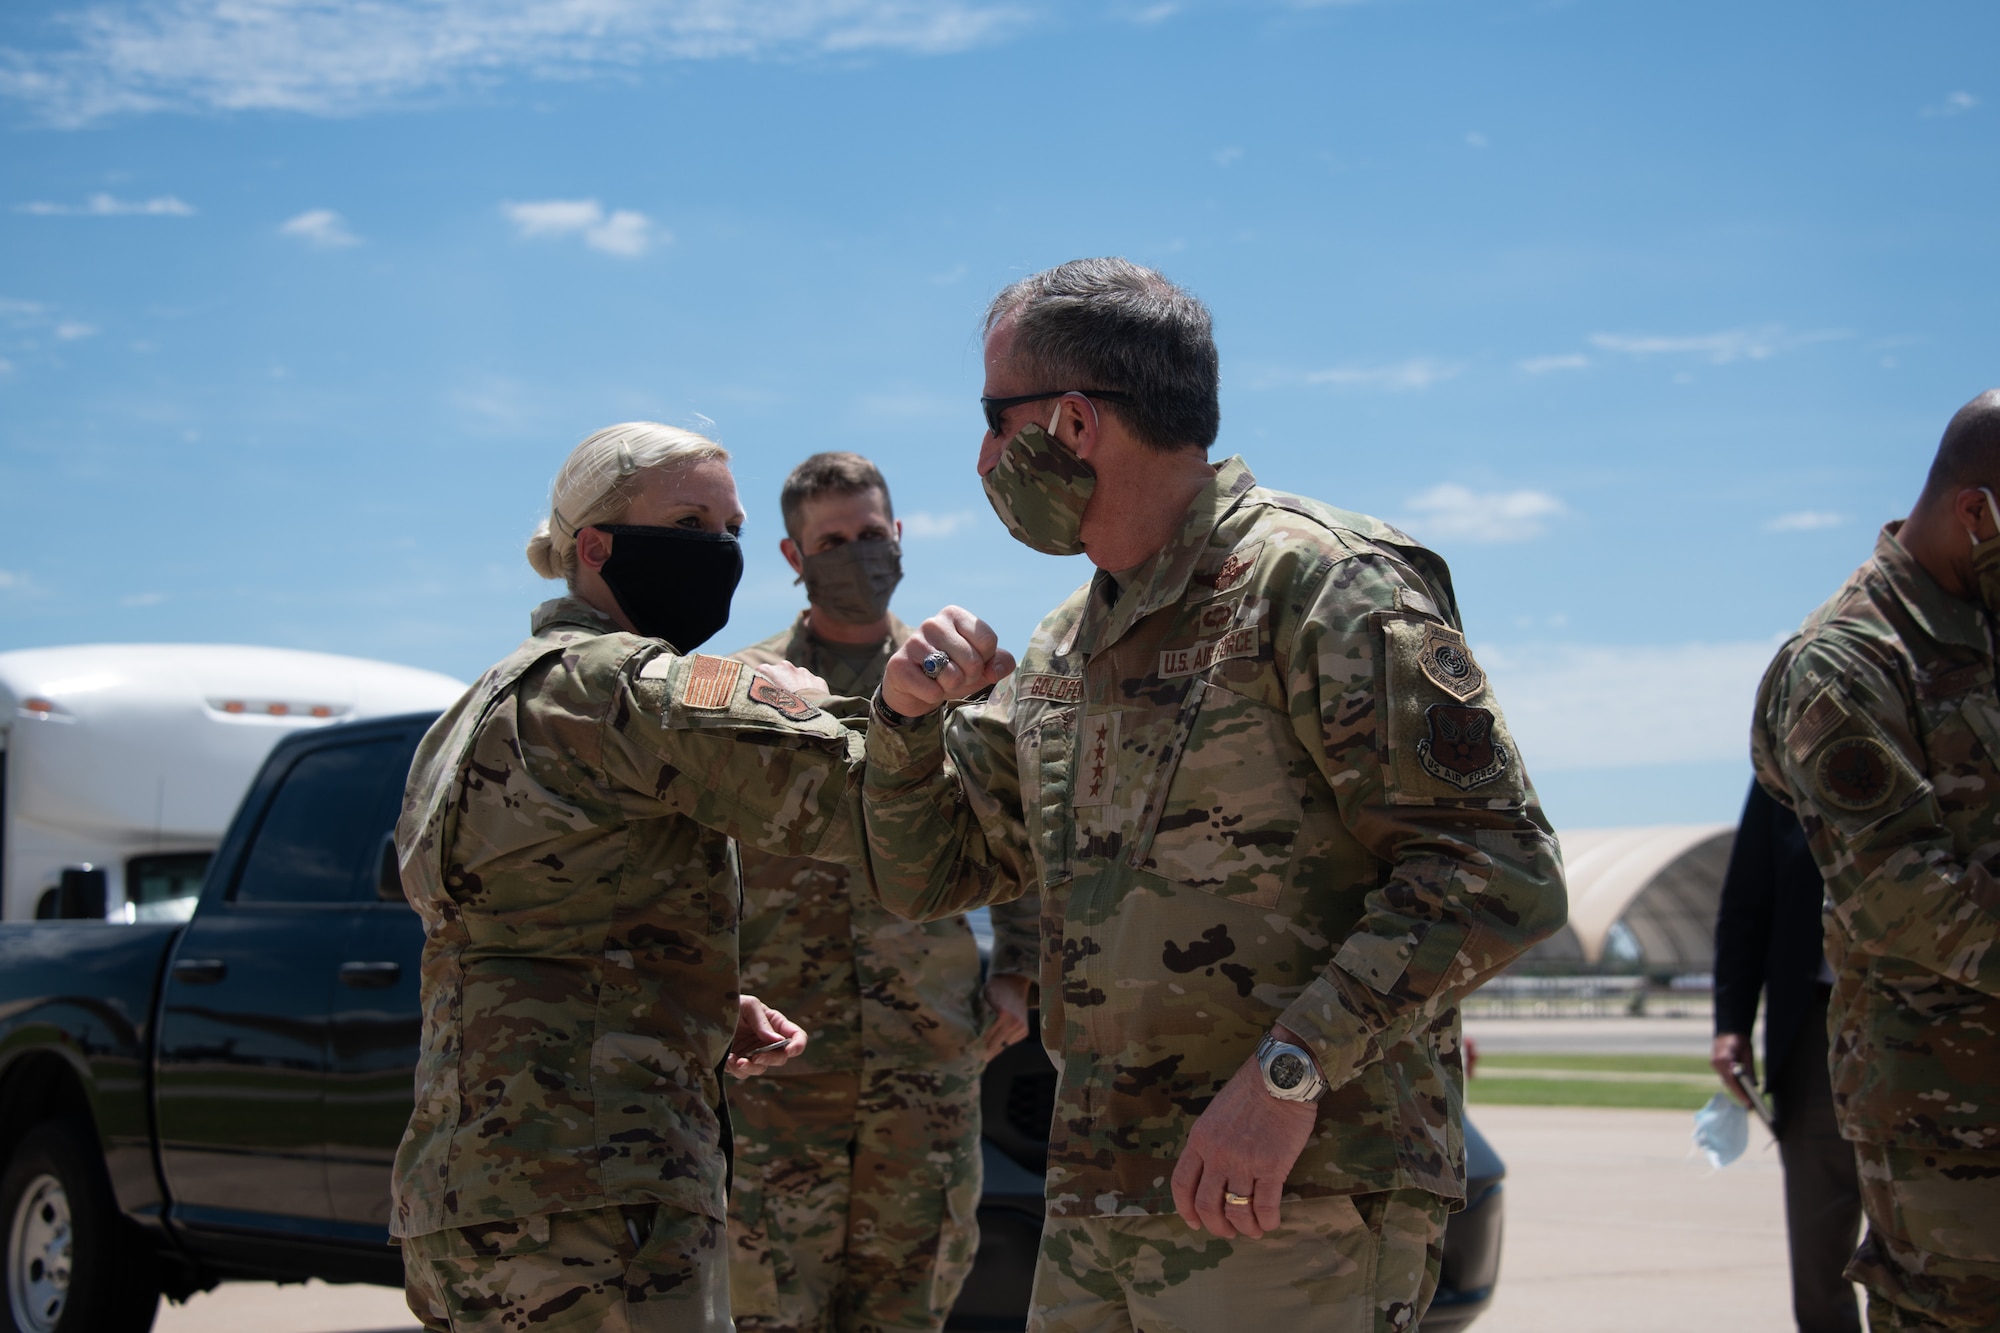 Air Force Chief of Staff Gen. David L. Goldfein bumps elbows with Capt. Audrey Mitchell, operations officer for the 137th Special Operations Logistics Readiness Squadron, during a base tour on June 8, 2020, at Will Rogers Air National Guard Base in Oklahoma City. The work of the 137th Special Operations Wing in support of intelligence, surveillance and reconnaissance missions has come across Goldfein's desk in recent months; and, in light of his upcoming visit, allowed the Wing to highlight its outstanding Airmen and highlight some of the most prominent features of the base that help execute the mission of the MC-12W.